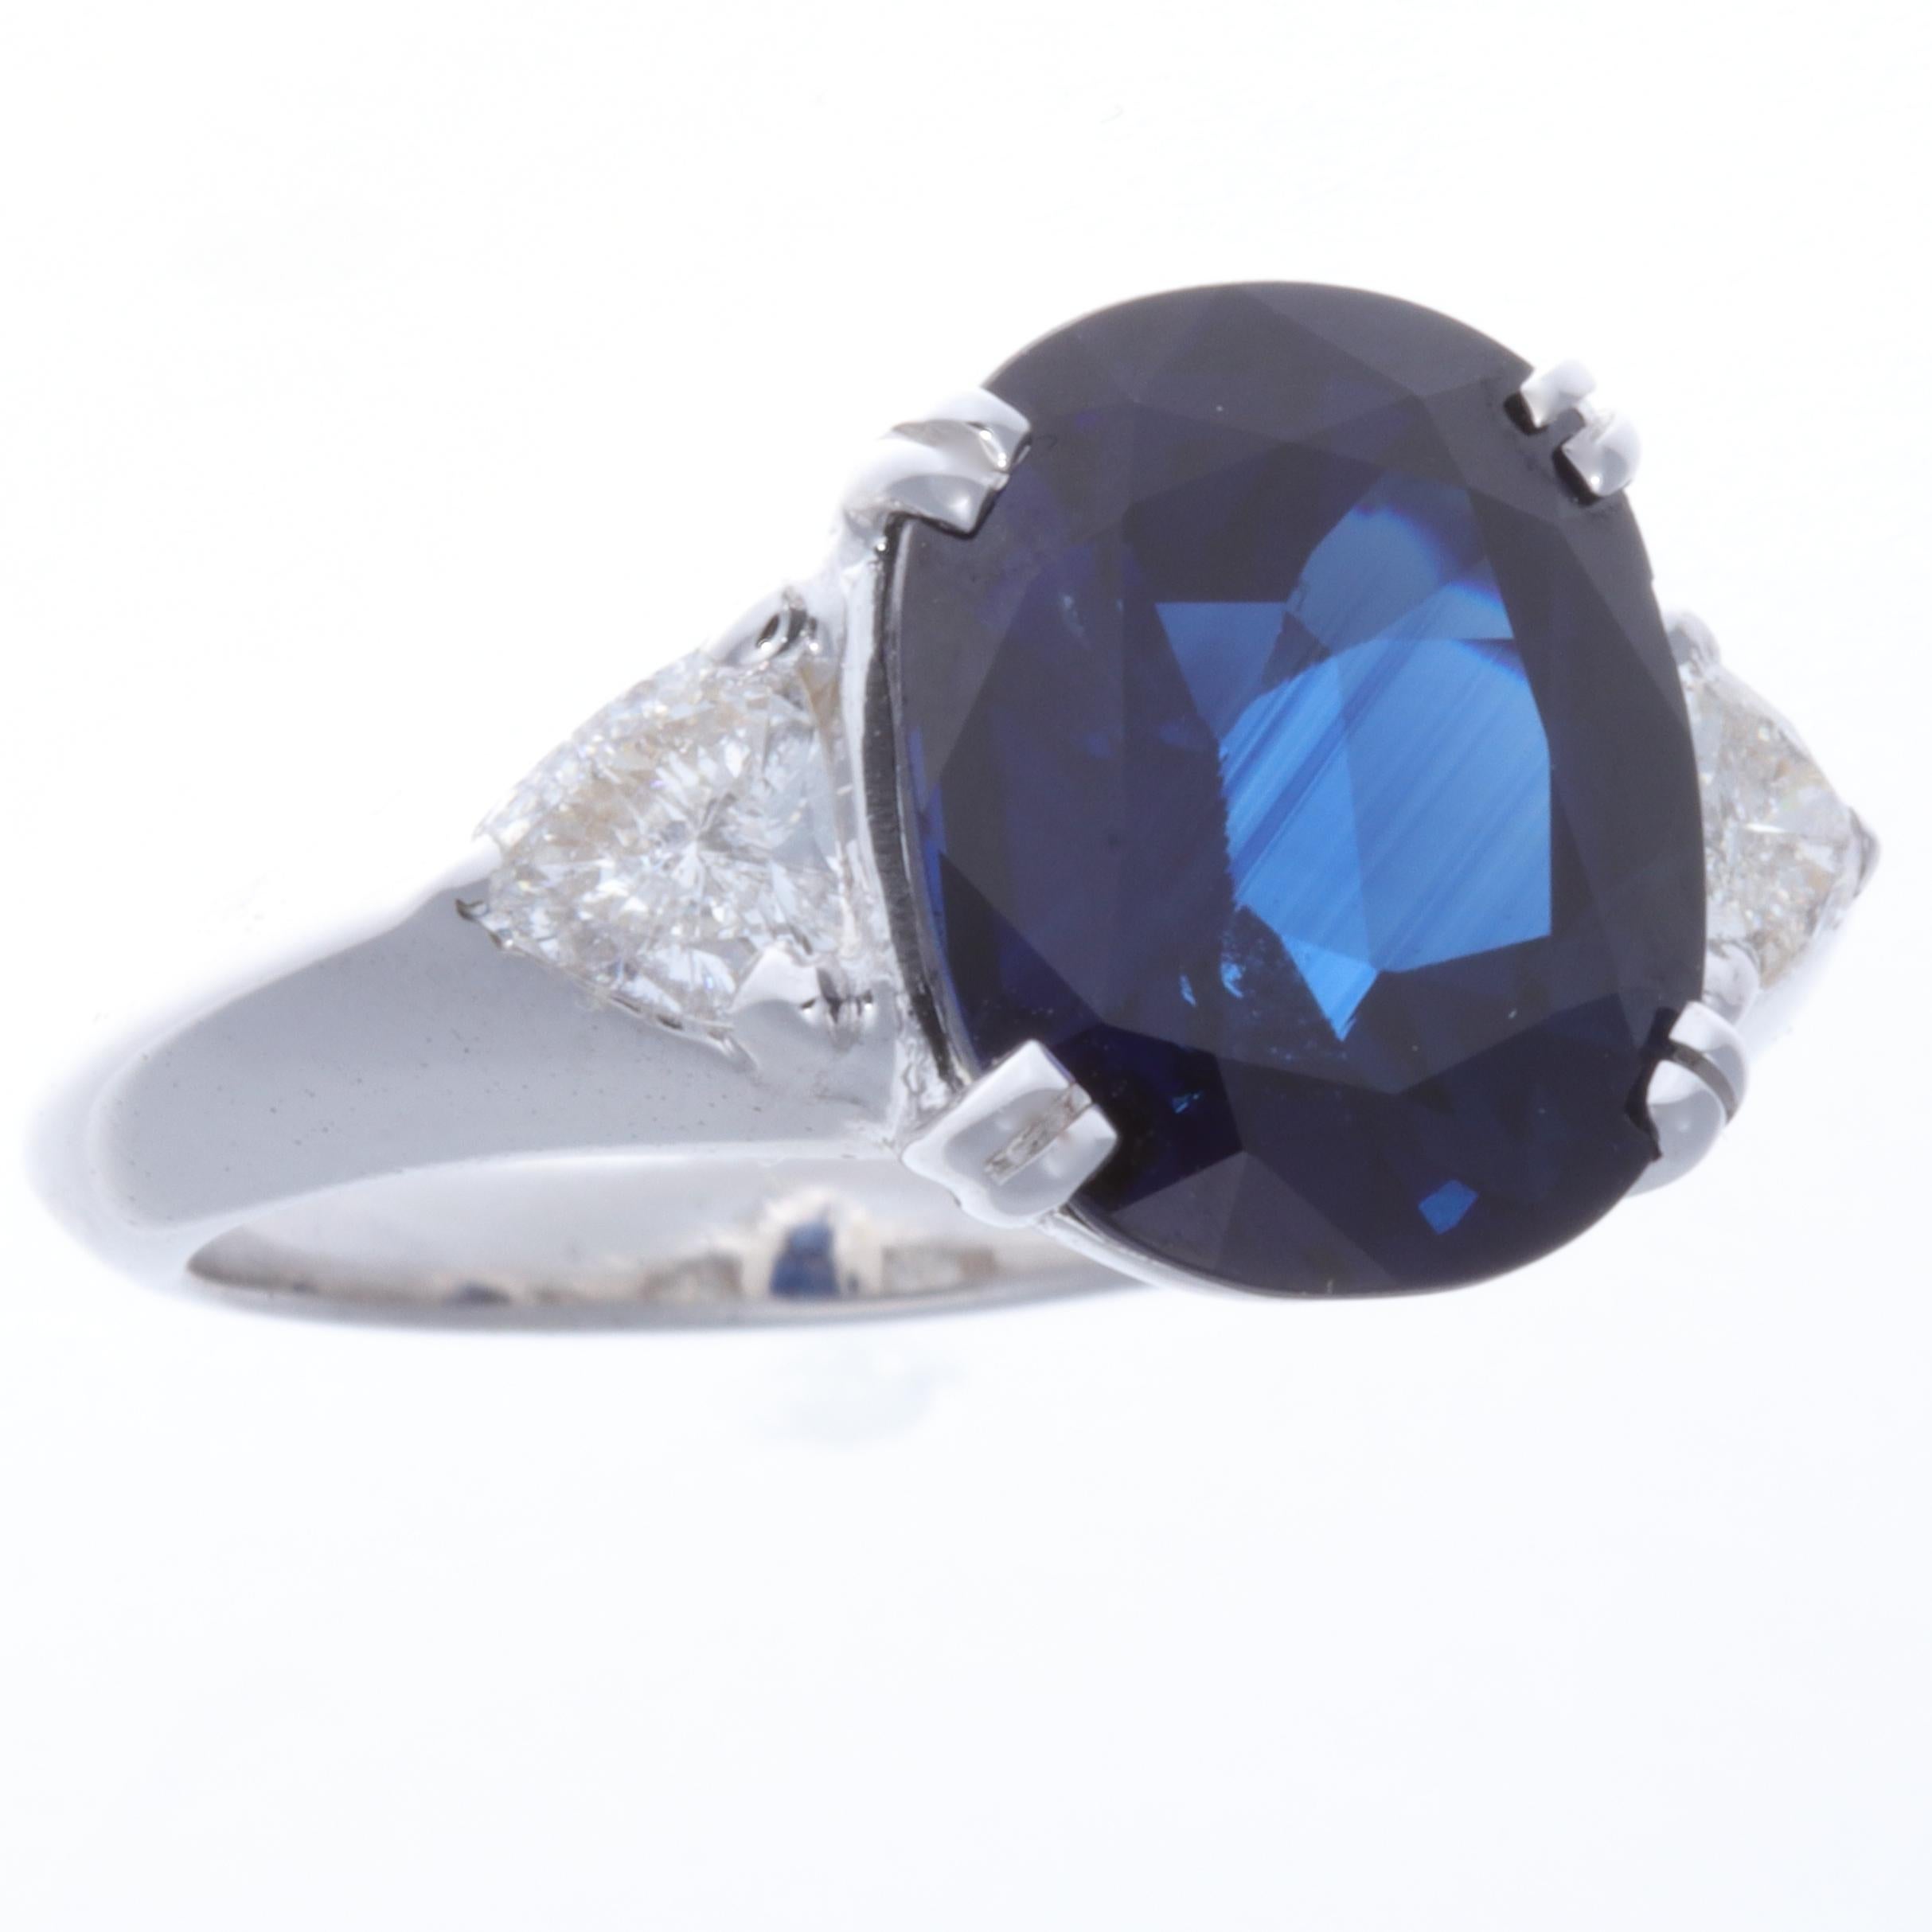 The 1950's, a time of new beginnings and idealism adding sophistication and structure to life. Represented in this this sparkling vivid blue sapphire set in a robust gold ring. The cushion cut sapphire weighs 5.85 carats, accented with two trillion